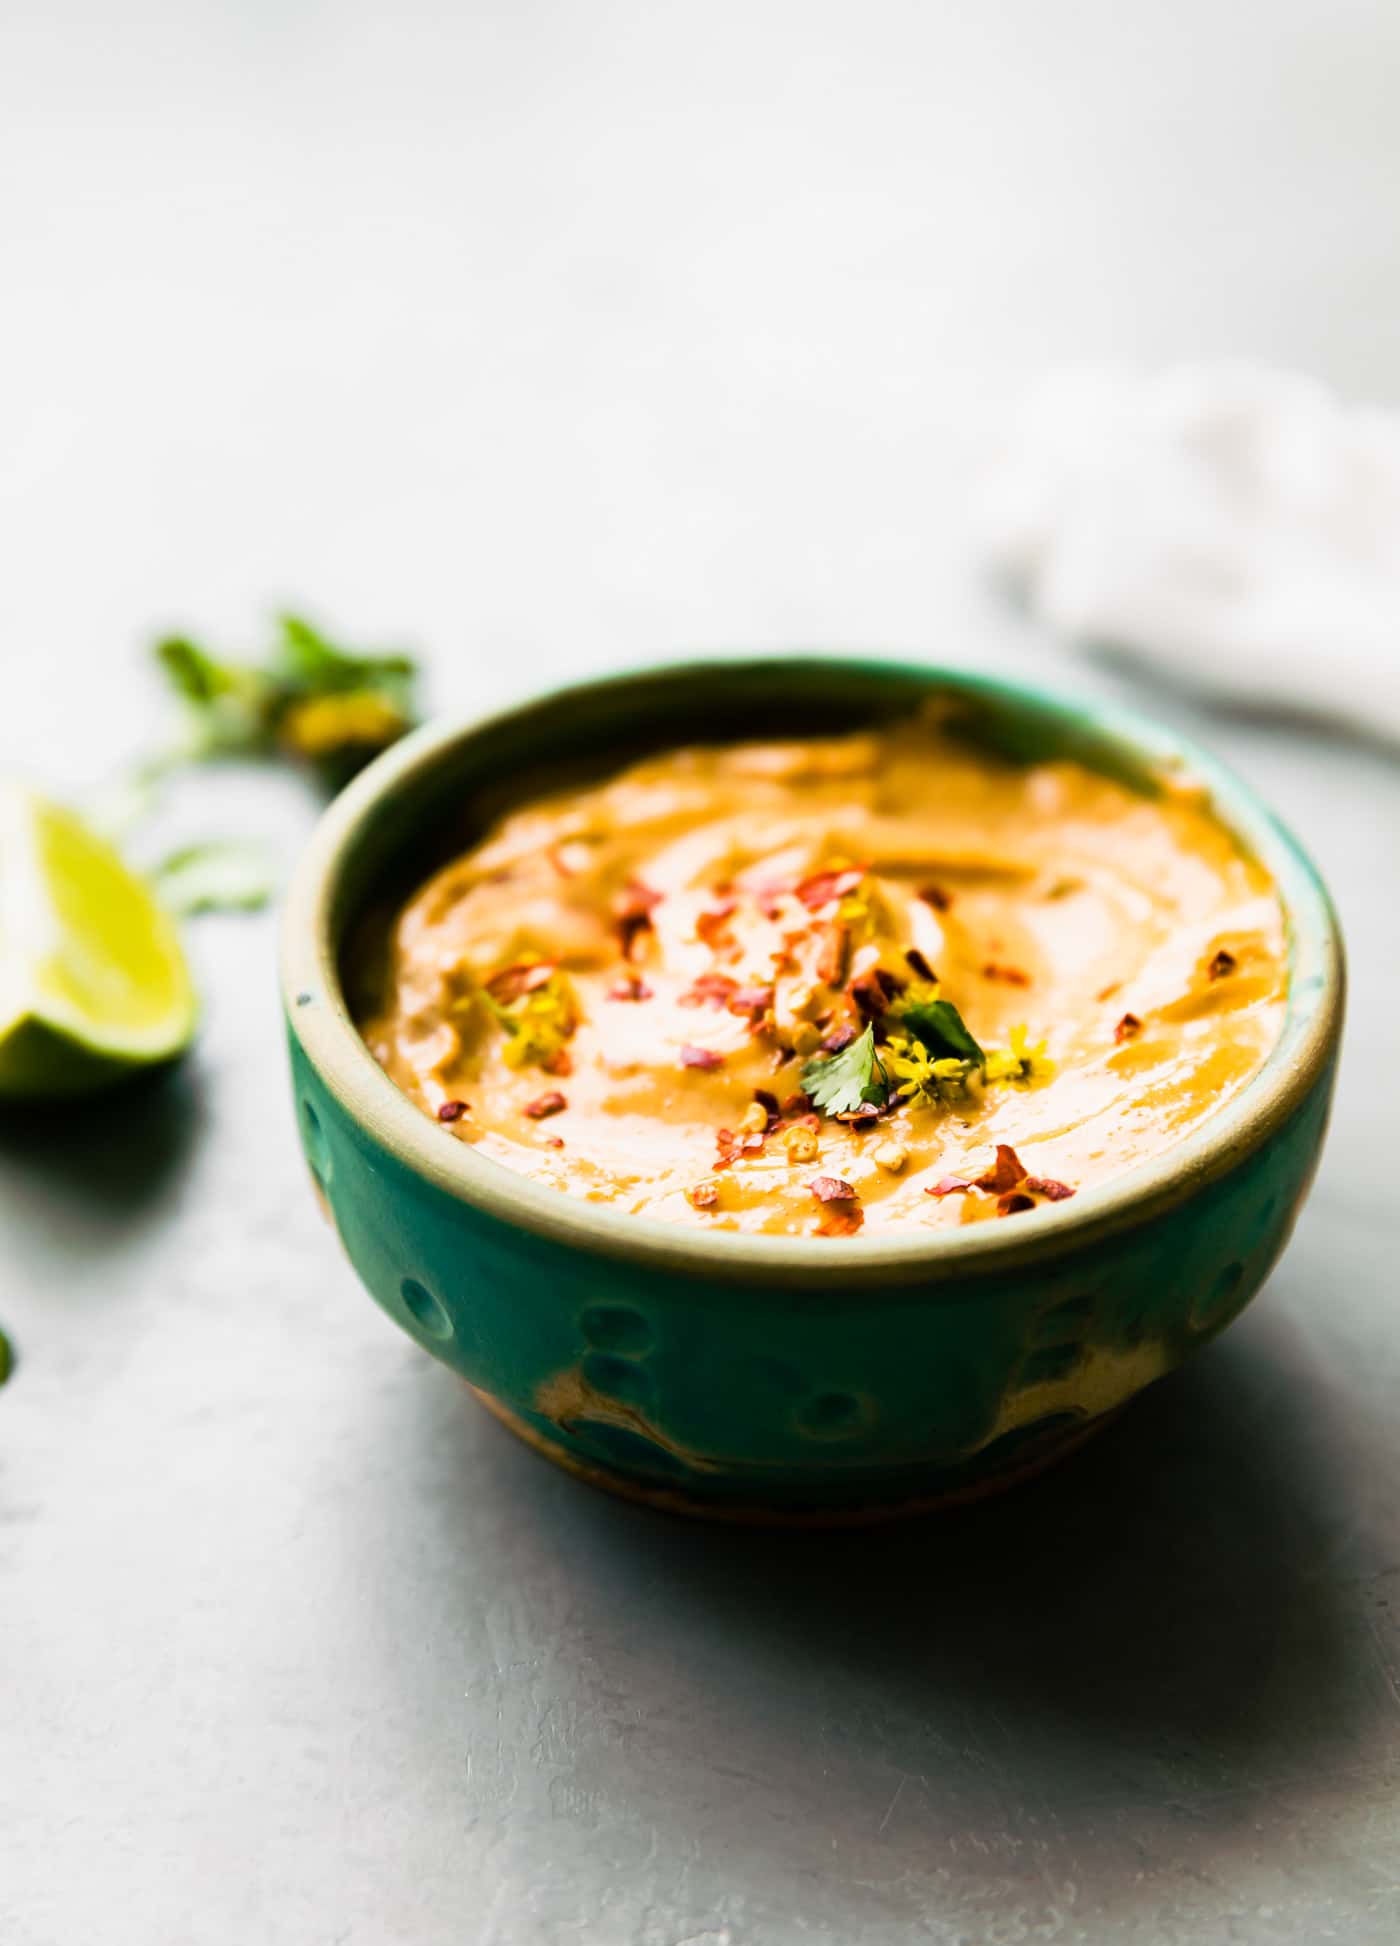 homemade chipotle mayo in bowl with spices on top